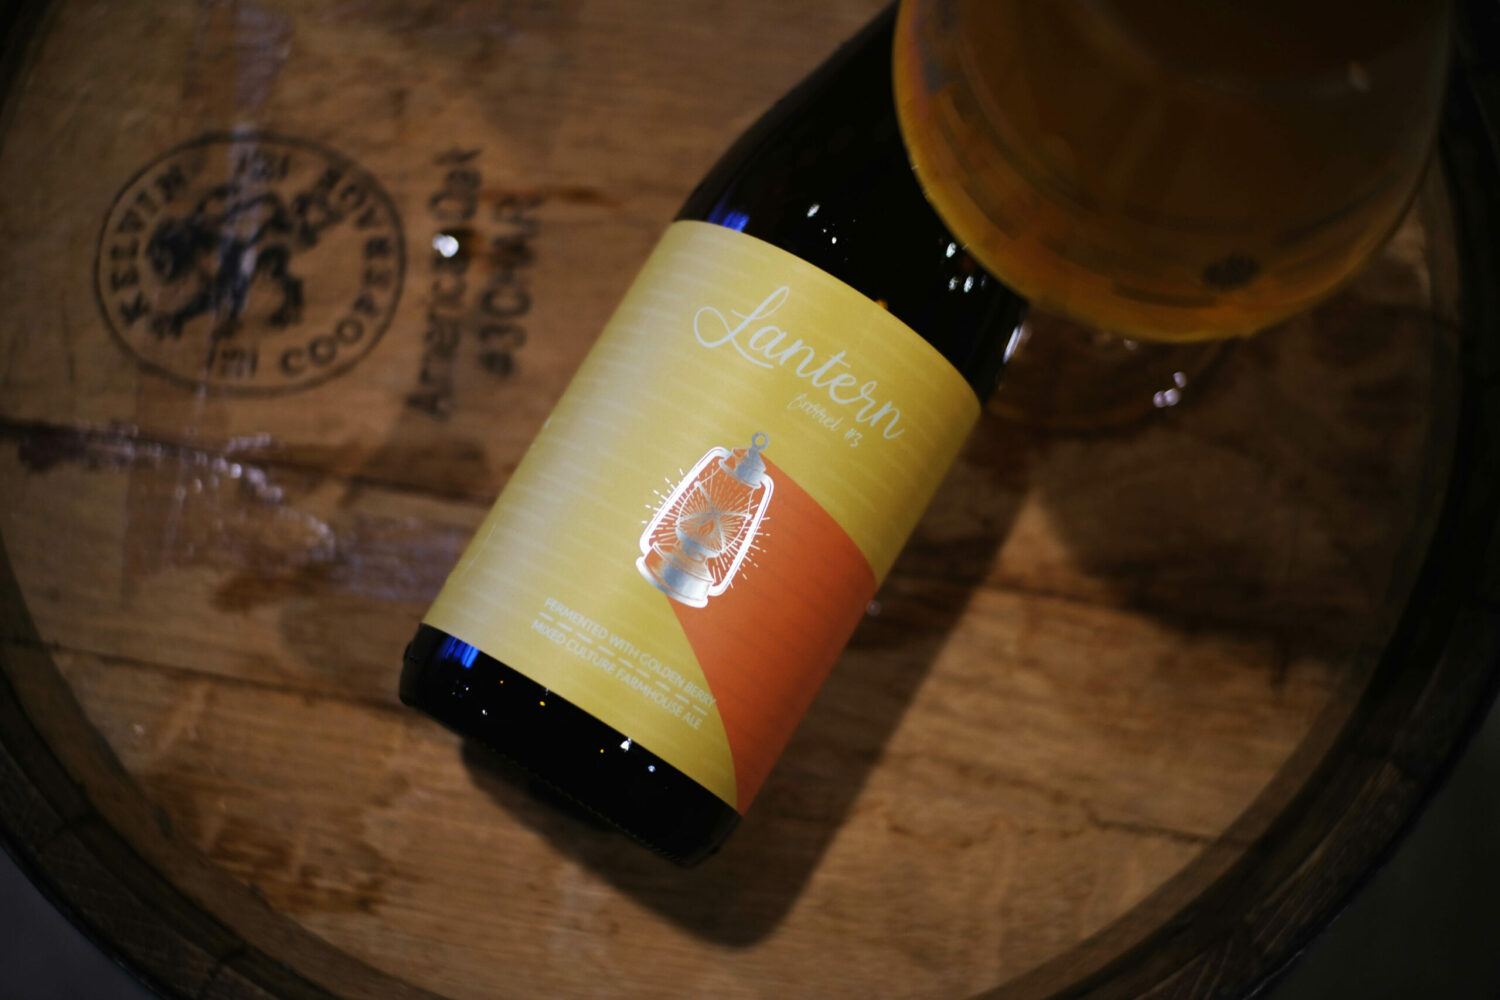 New Barrel-Aged Blonde Projects From The 42 Below Barrel-House